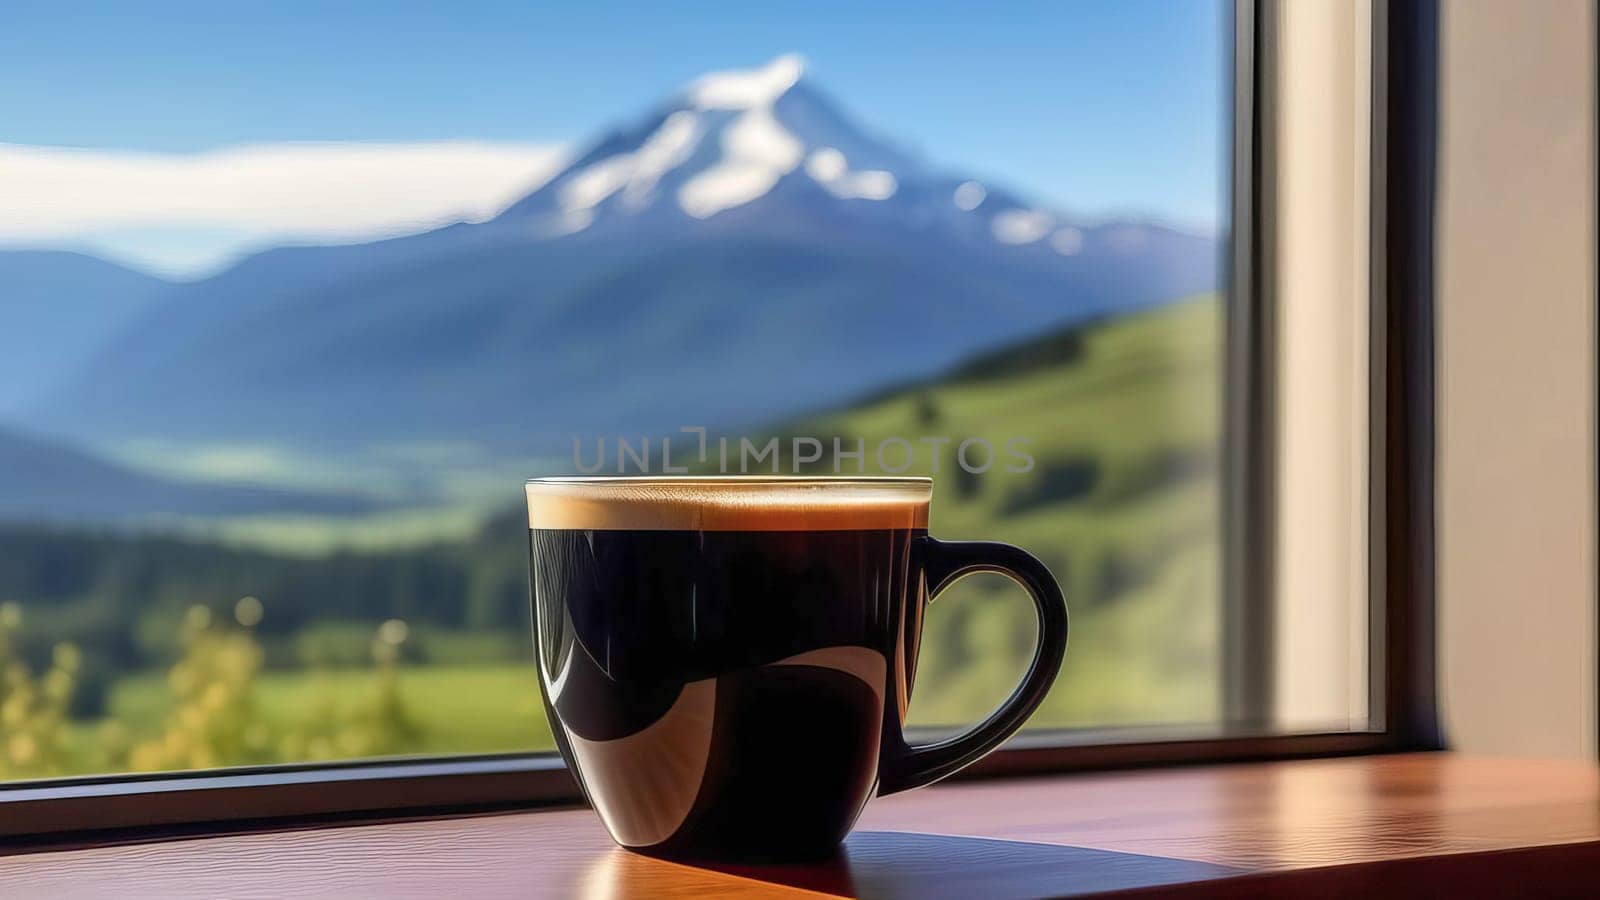 Cup of coffee with a view of the landscape outside the window. by OlgaGubskaya